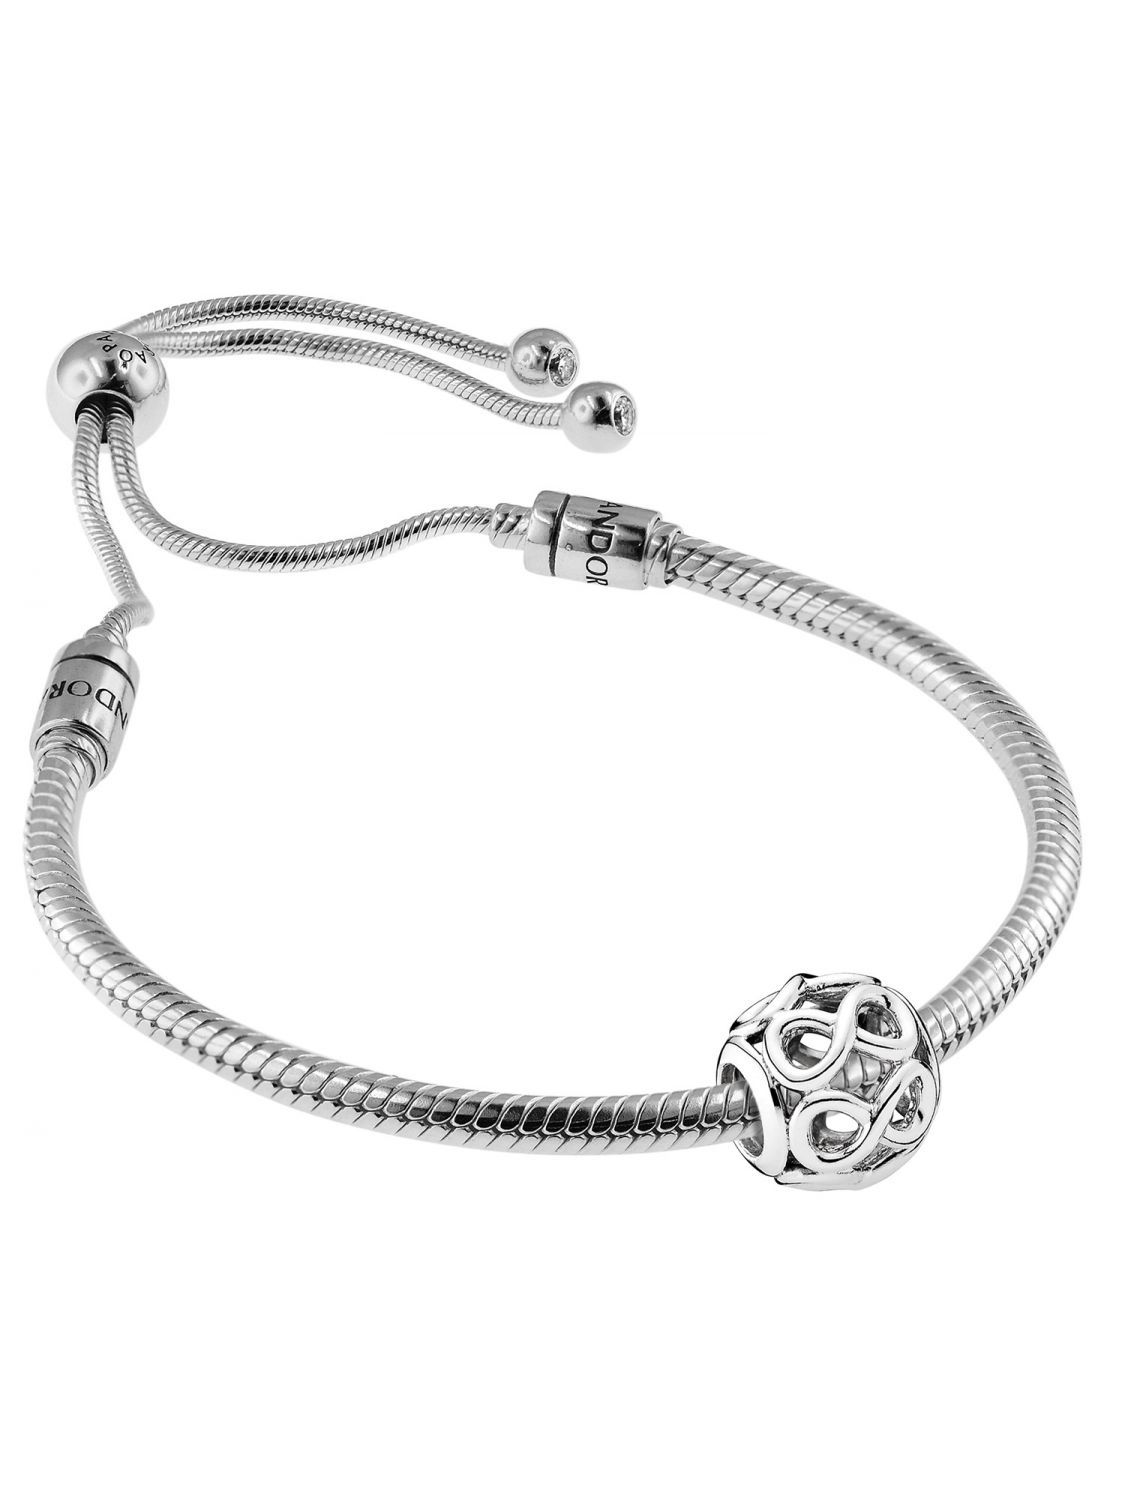 Pandora 08662 Bracelet Set Moments Sliding And Infinity For Most Recently Released Pandora Moments Snake Chain Necklaces (View 8 of 25)